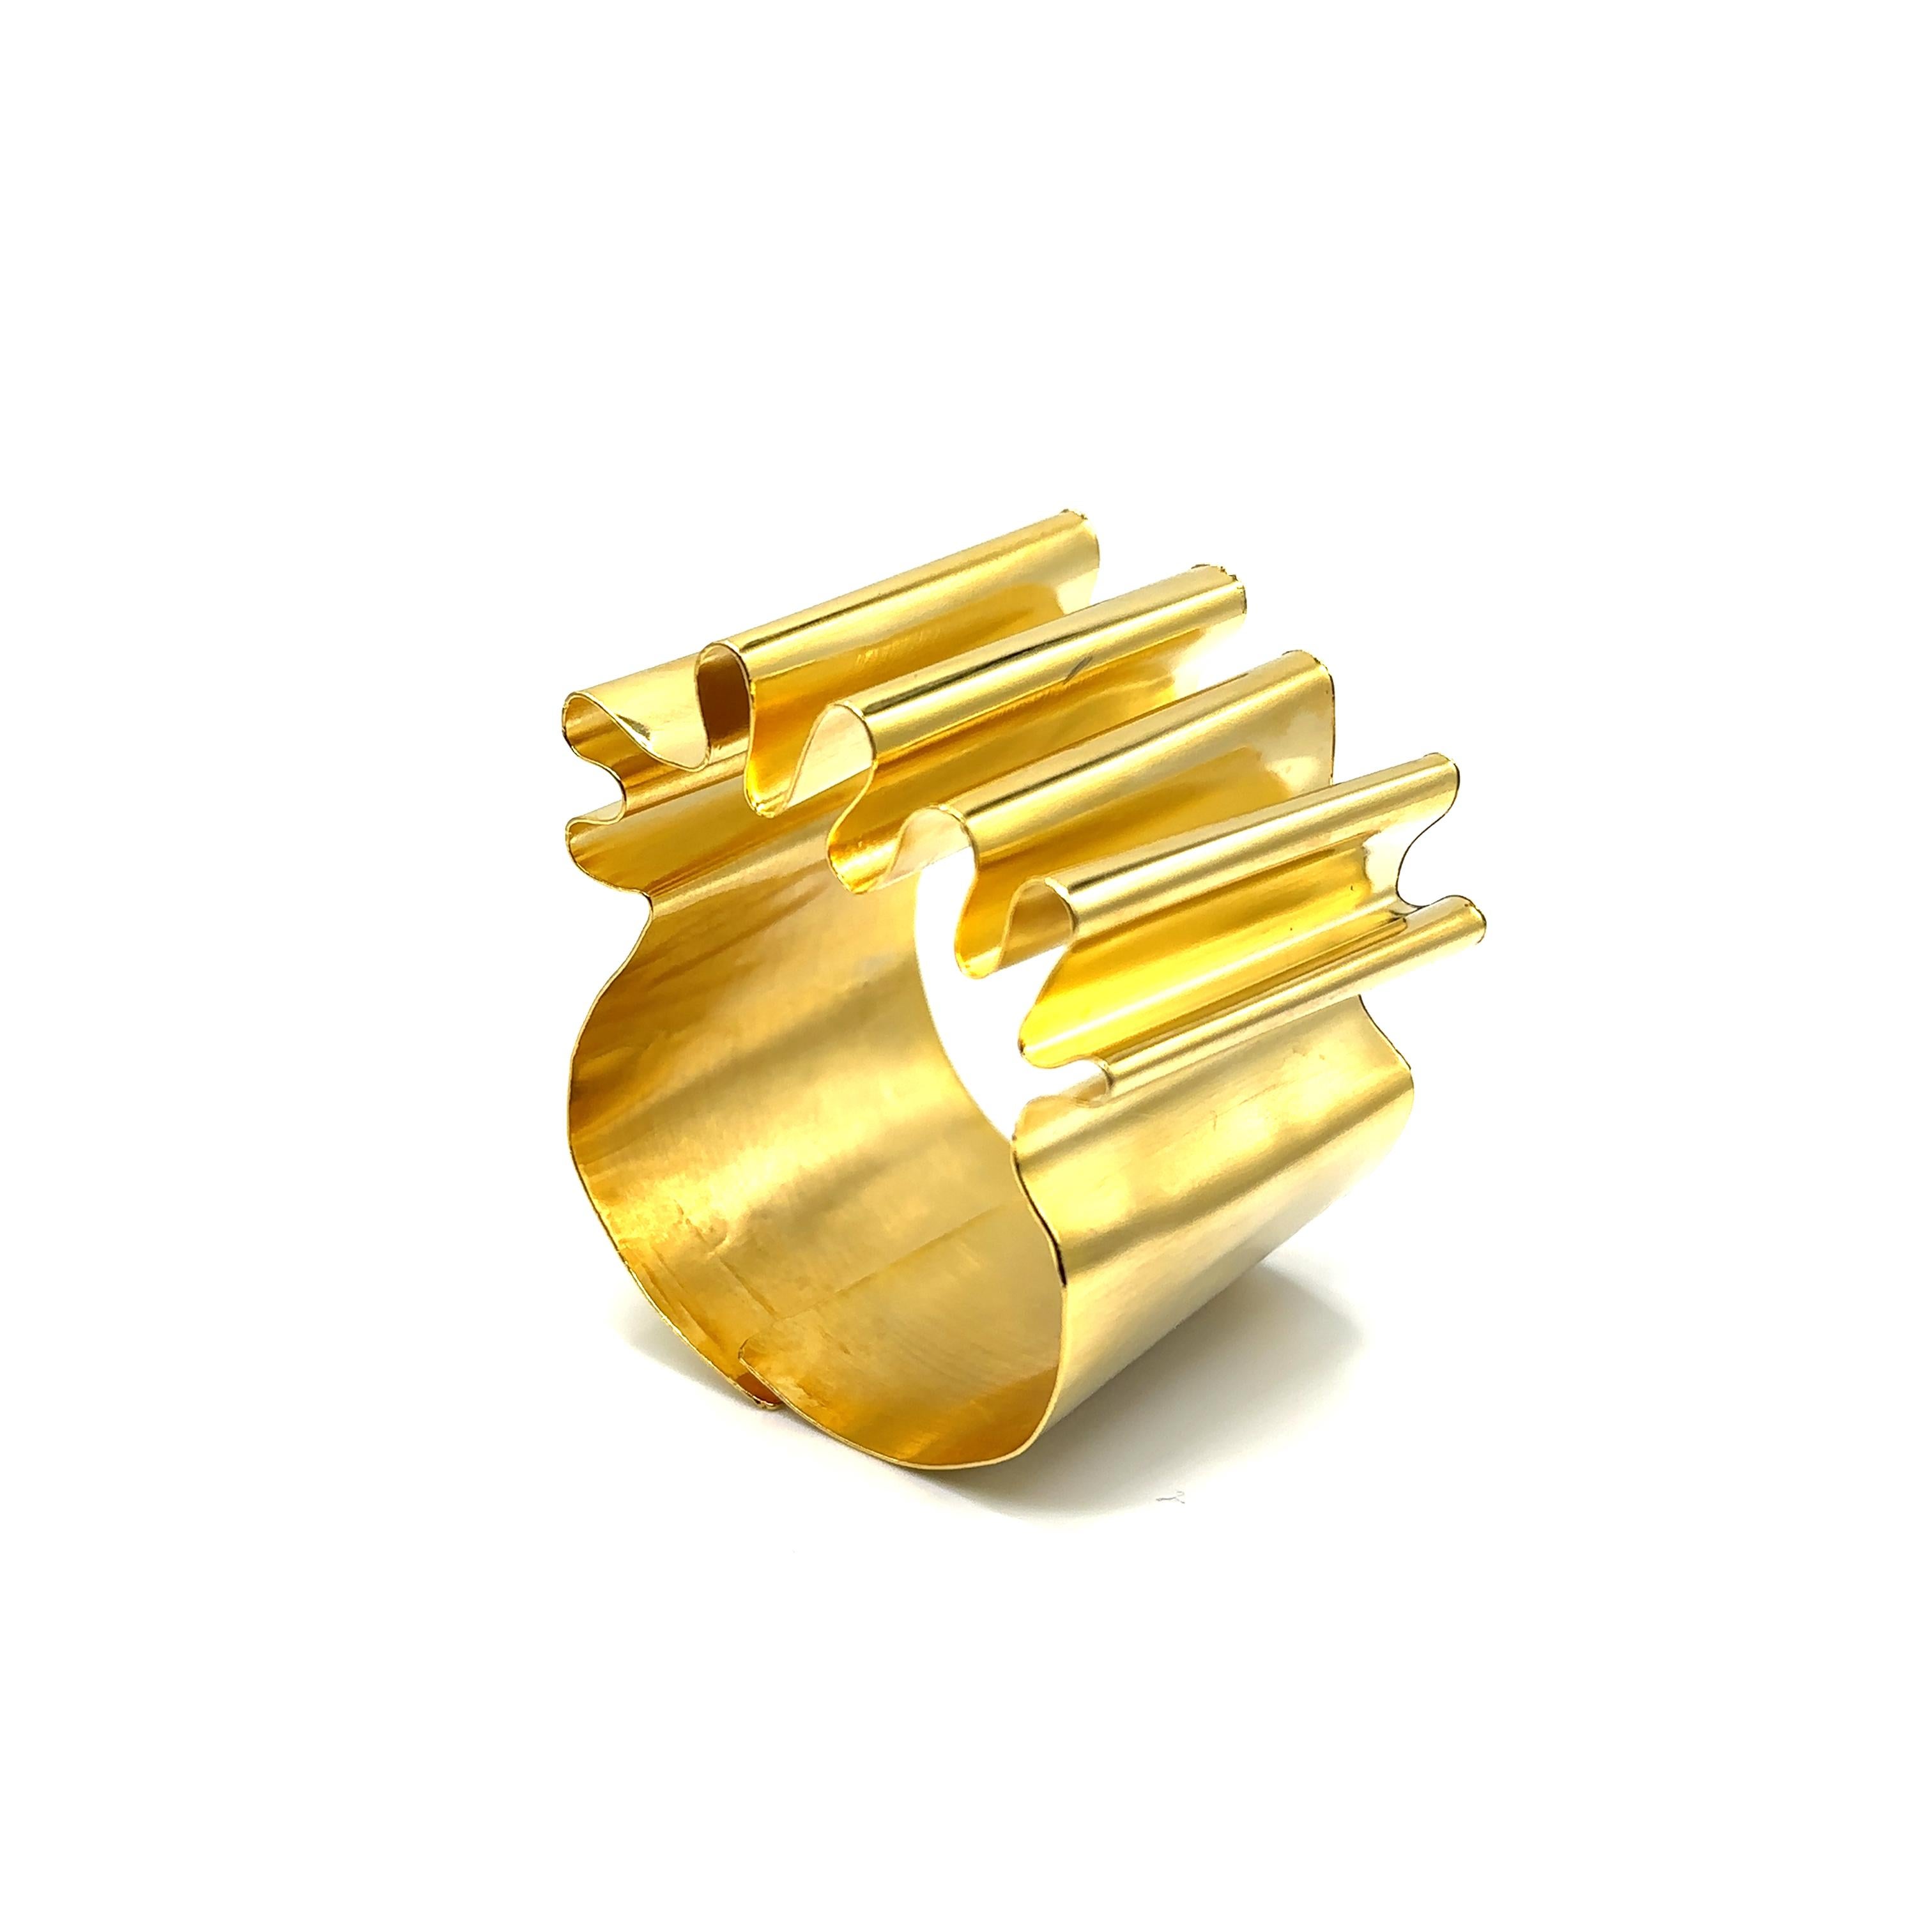 From refined, timeless shapes to modern characters with edge meet FRIDA - handcrafted and shape may vary slightly making pieces one of a kind Material 14K Gold Plated.

The piece was inspired by Japanese origami. Folding techniques were used.